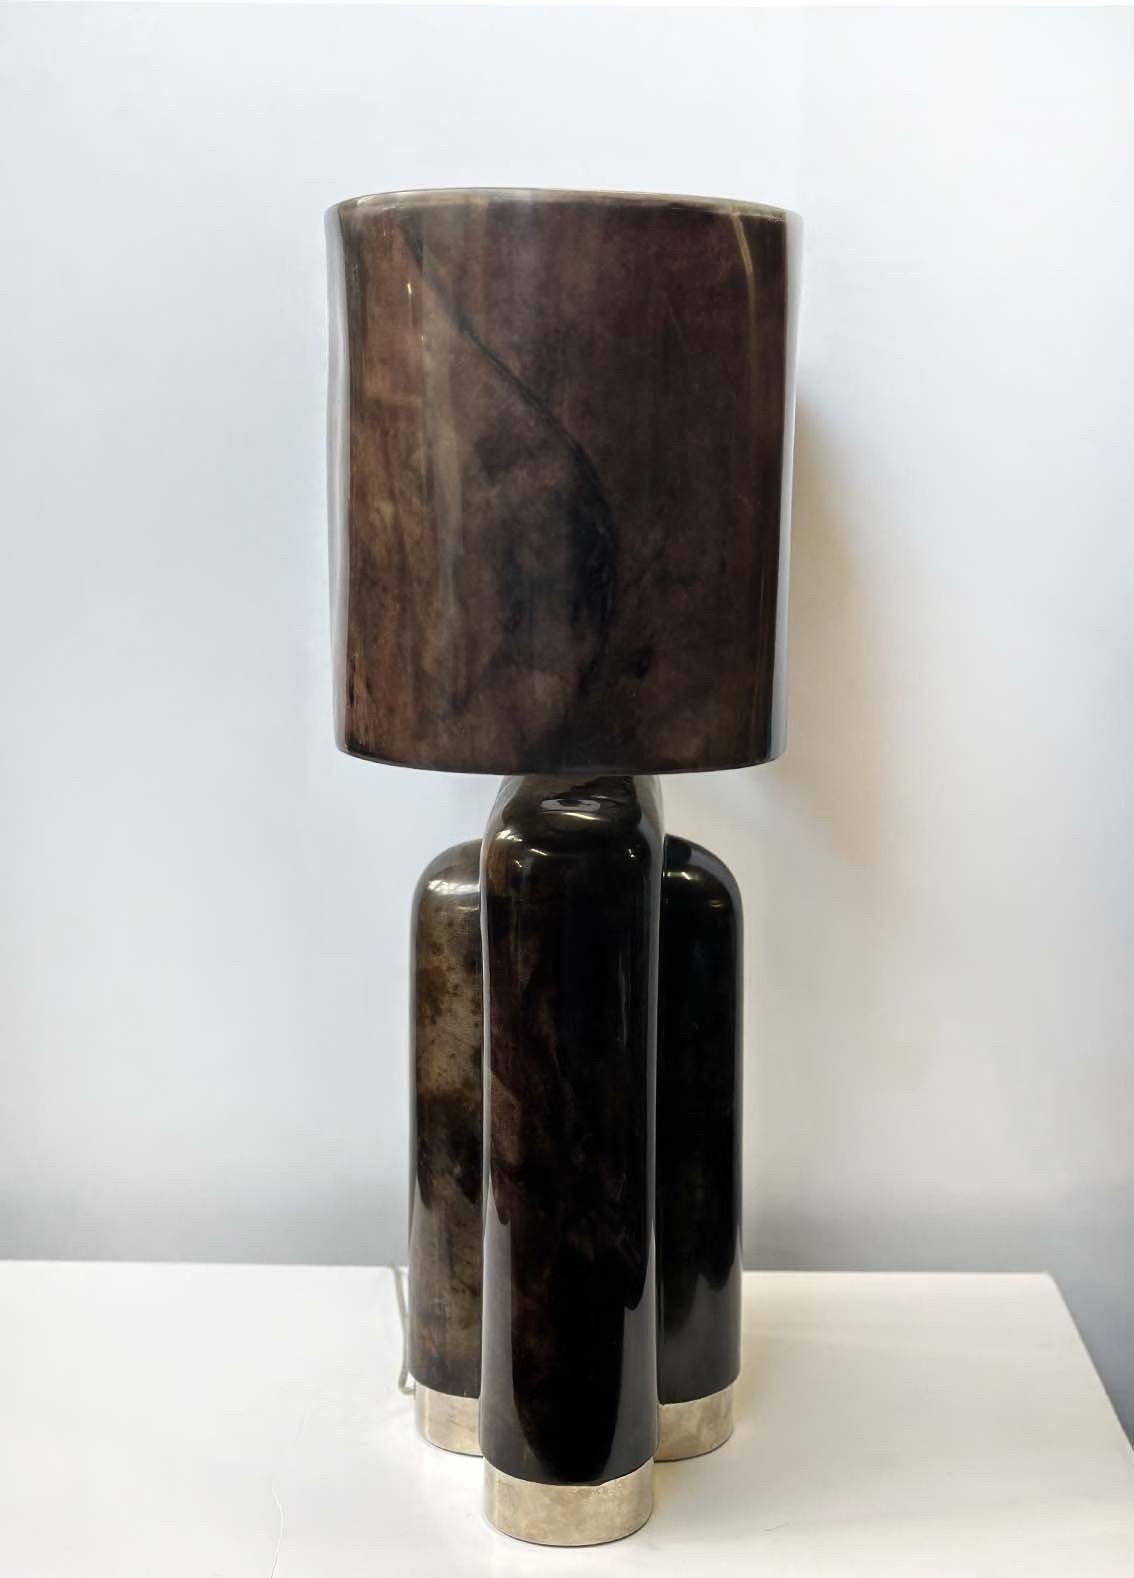 Vintage goatskin and parchment table lamp in dark shades of aubergine and brown. To enhance its durability and beautiful details, the lamp is finished with a high-gloss polyester resin, which not only protects the surface but also gives it a